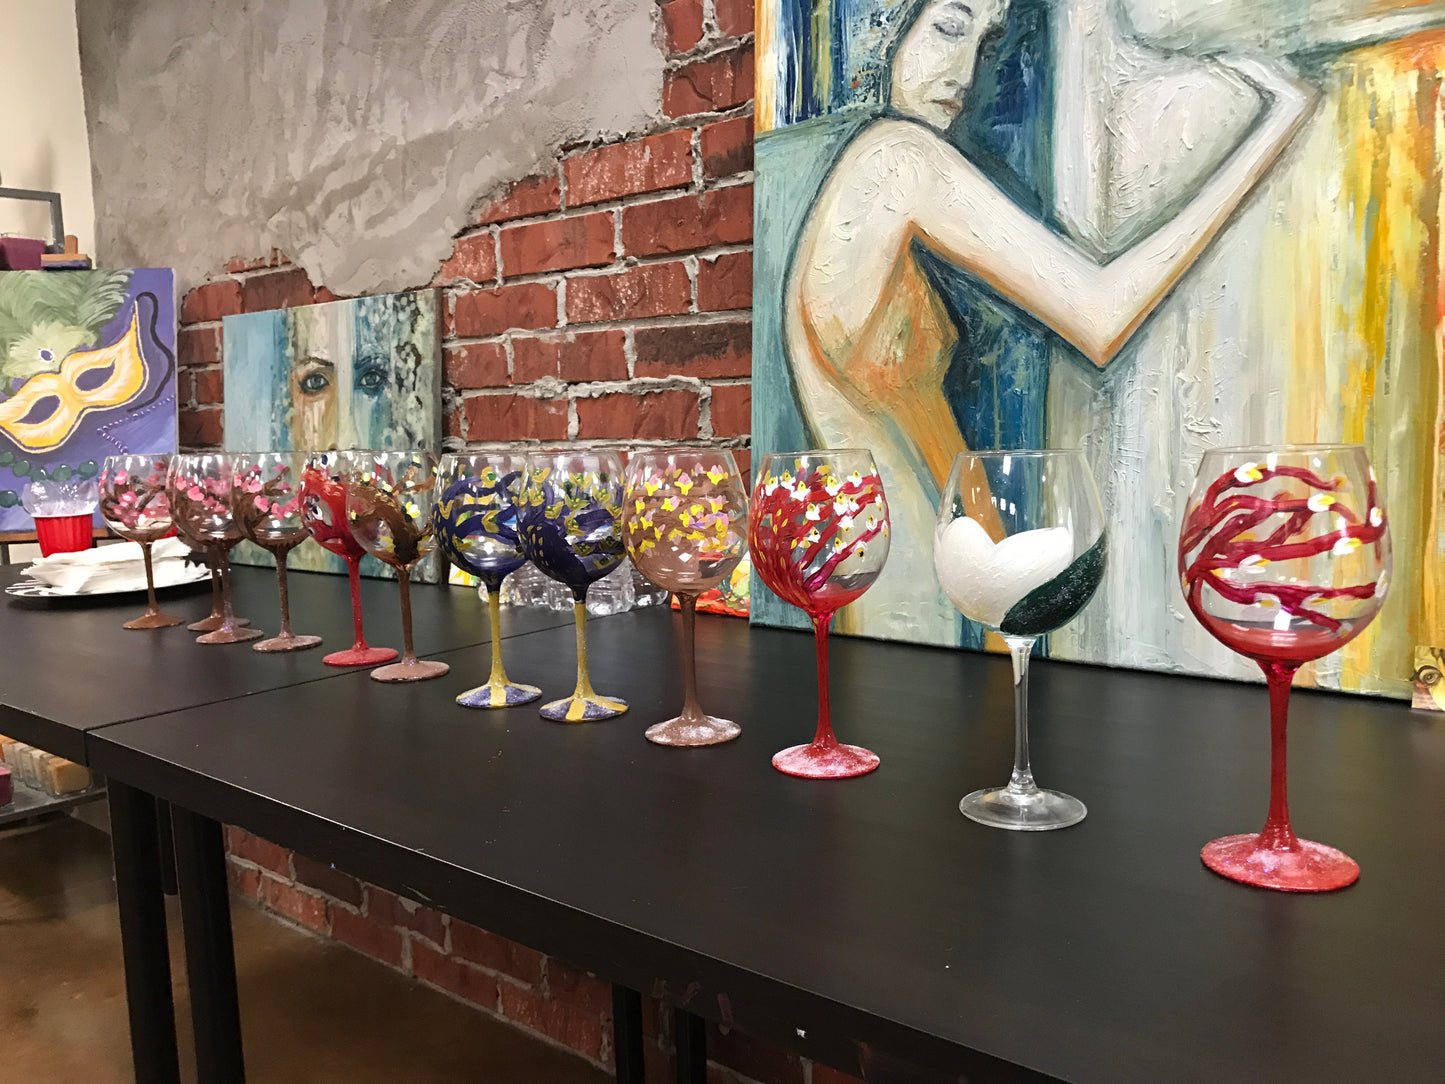 Sat, May 4, 6-9pm "Painting on Wine Glasses" Public Houston Wine & Paint Class